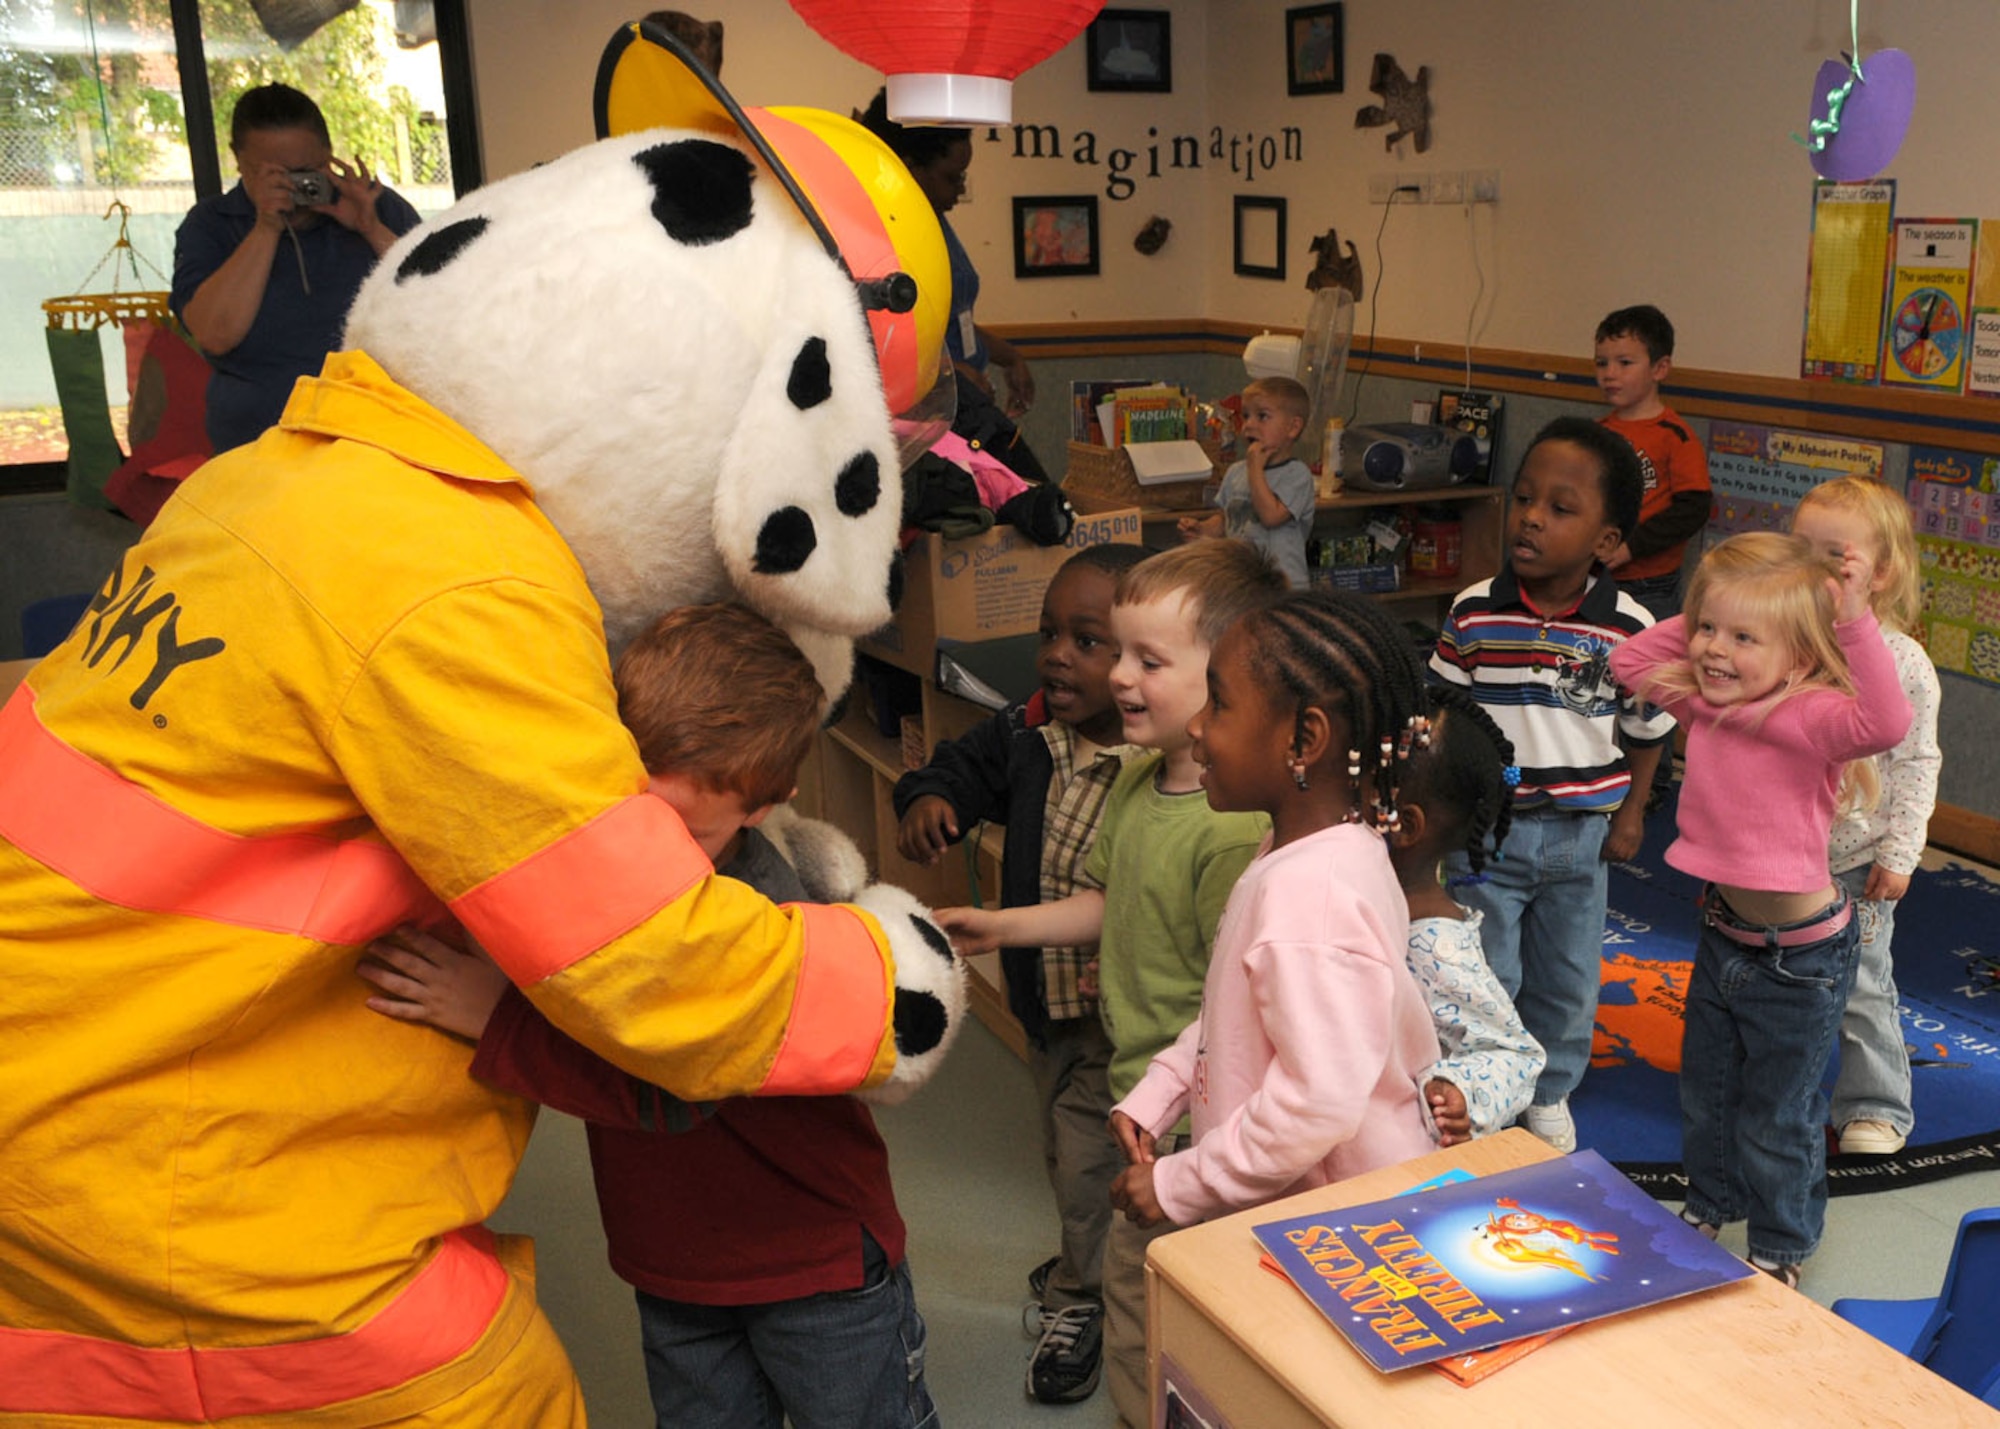 Children aged 3 to 5 years old, jump up and down in excitement and run into the arms of Sparky the fire dog during his visit to the Child Development Center Oct. 6, 2008, on RAF Mildenhall, England. The visit to the CDC is in support of “Fire Prevention Week” that takes place from Oct. 5 through 11, providing servicemembers and their families helpful tips and information about fire safety. (U.S. Air Force photo by Staff Sgt. Jerry Fleshman)